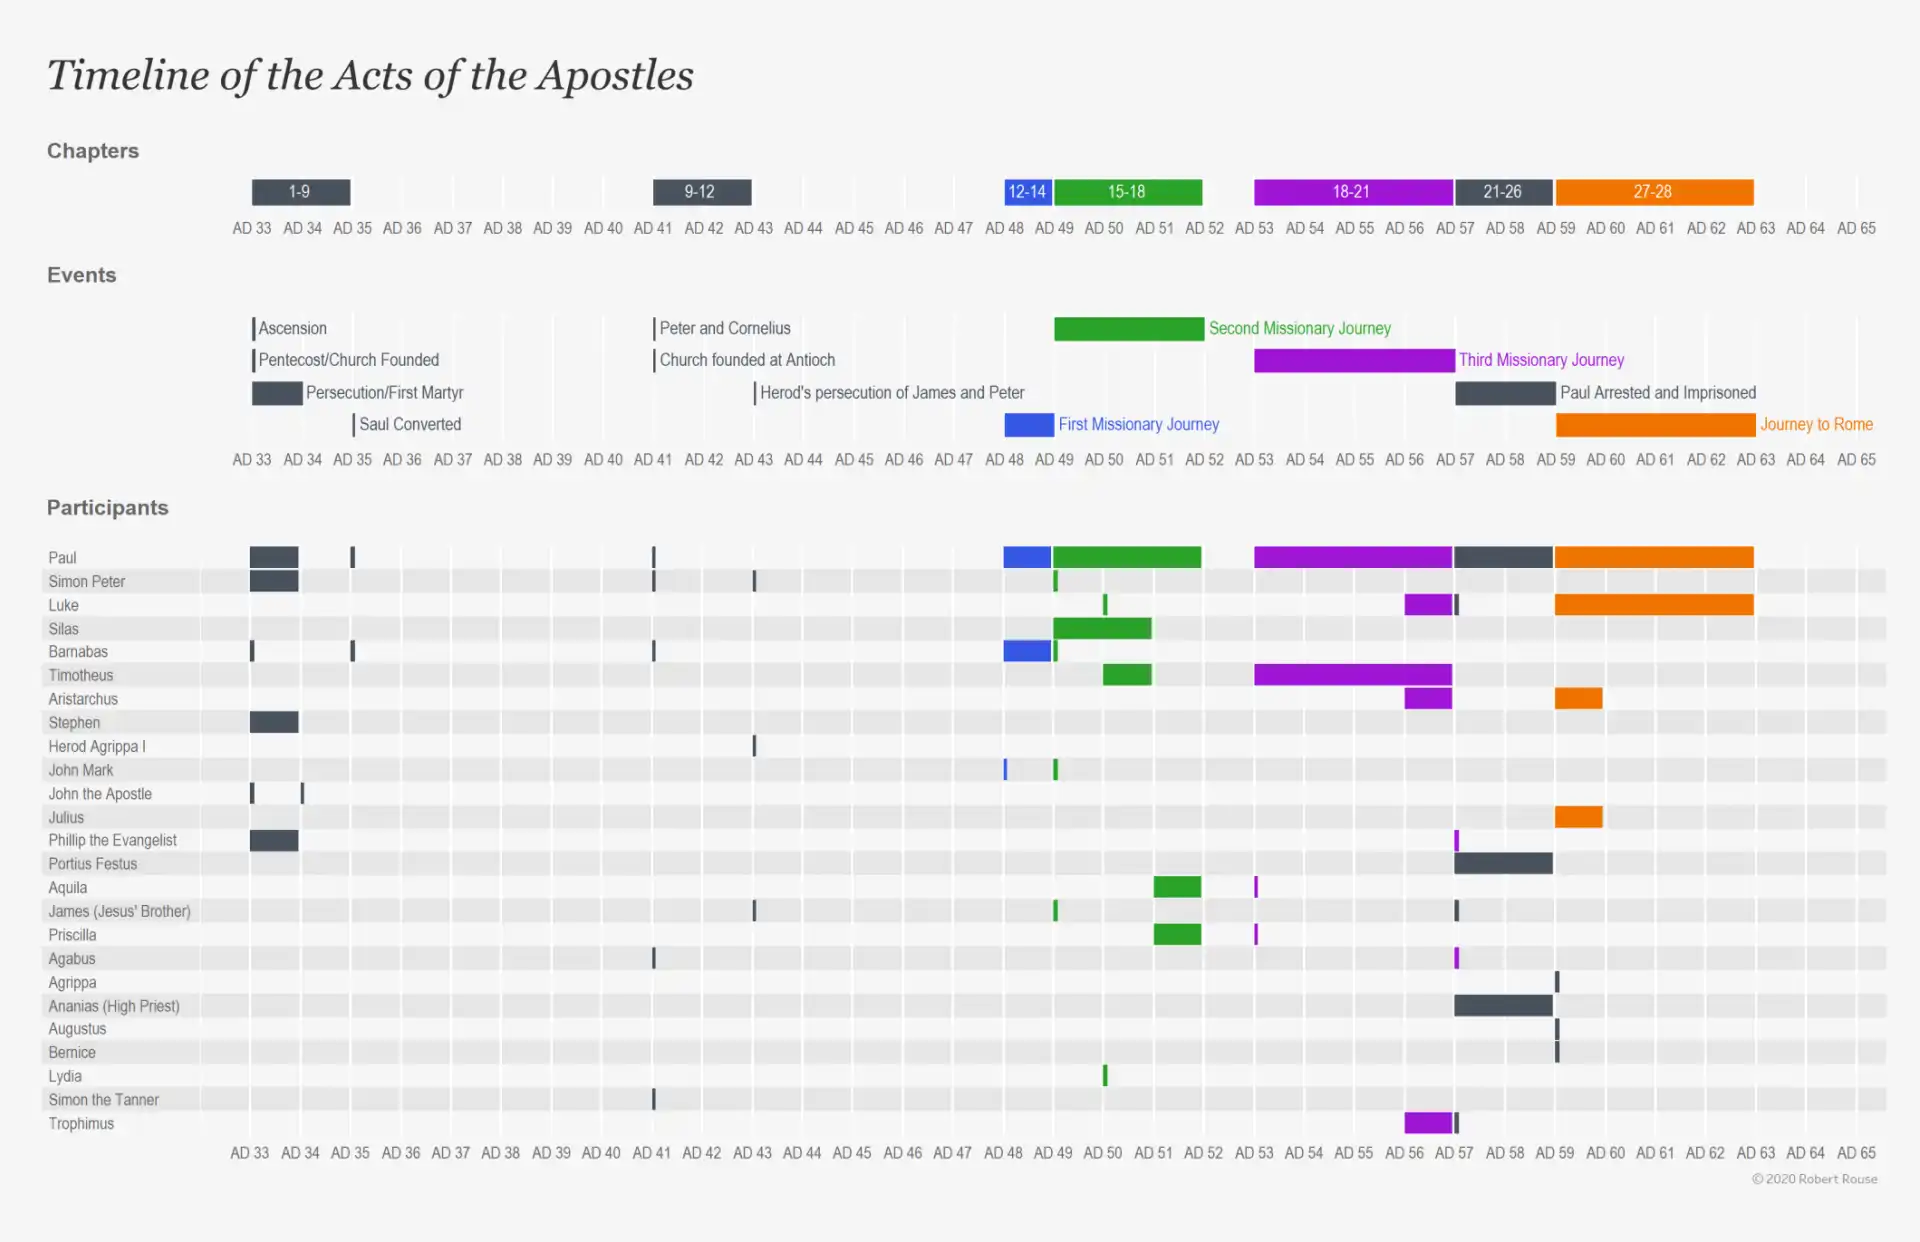 Timeline of the Acts of the Apostles